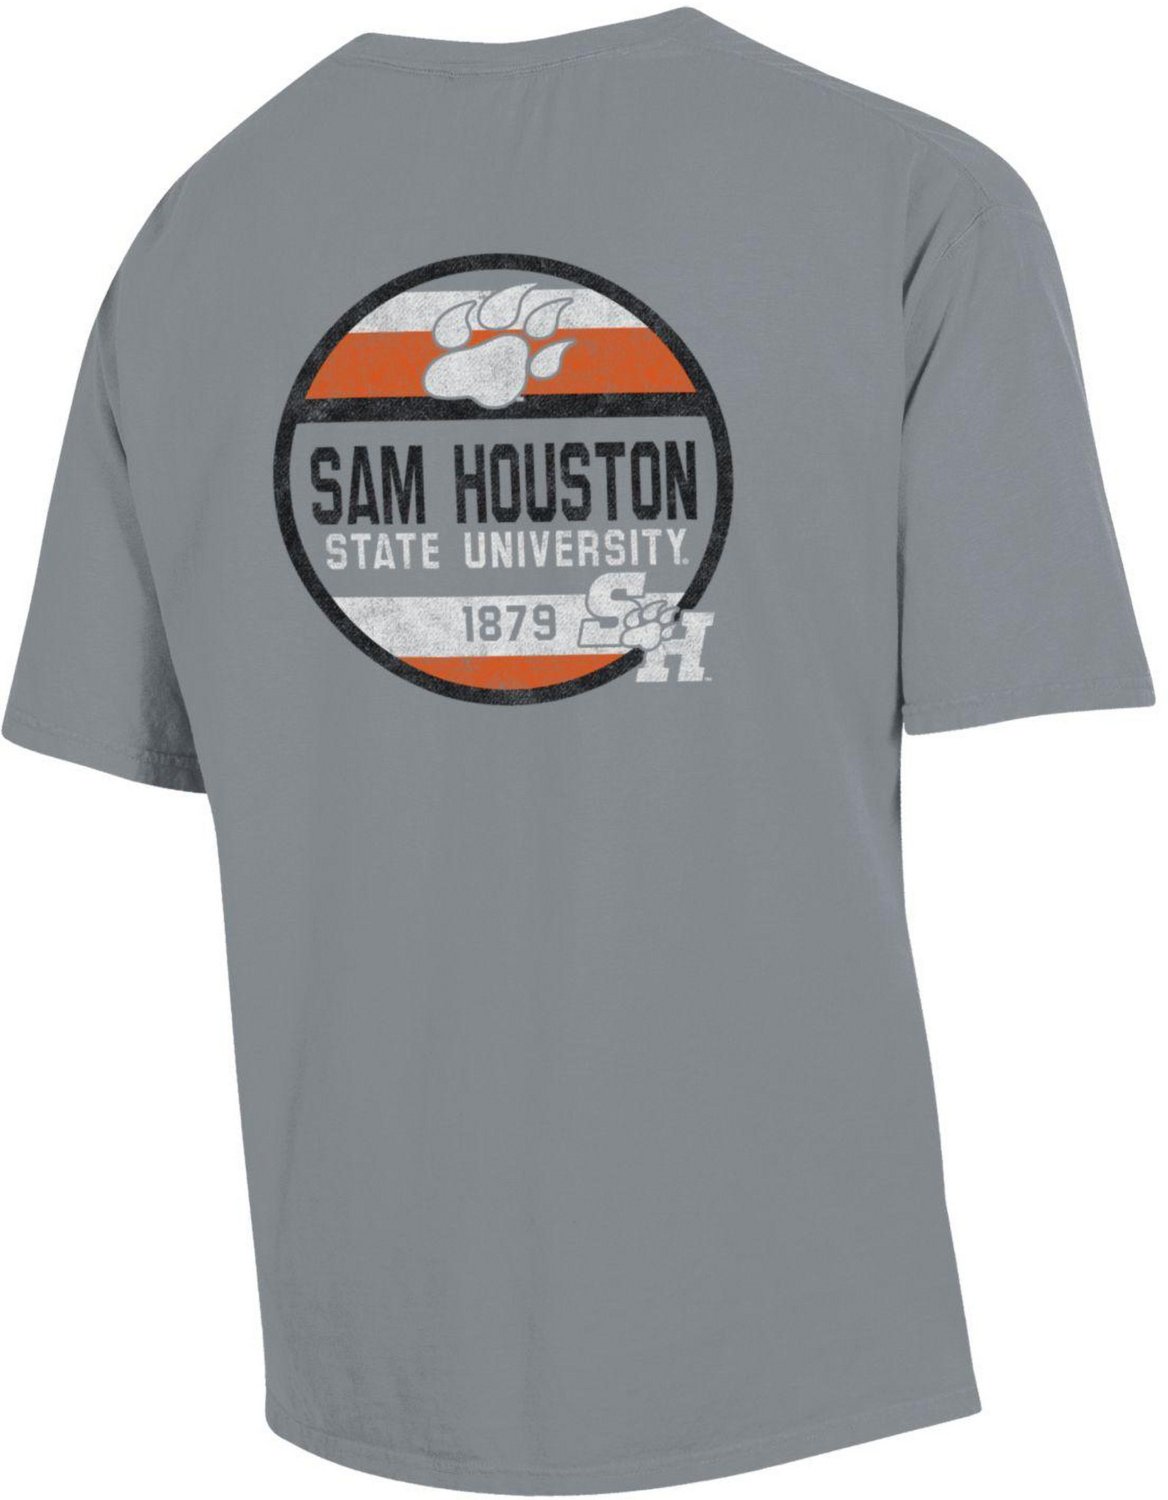 Academy Sports + Outdoors GEAR FOR SPORTS Men's Sam Houston State University  Comfort Wash Circle T-shirt